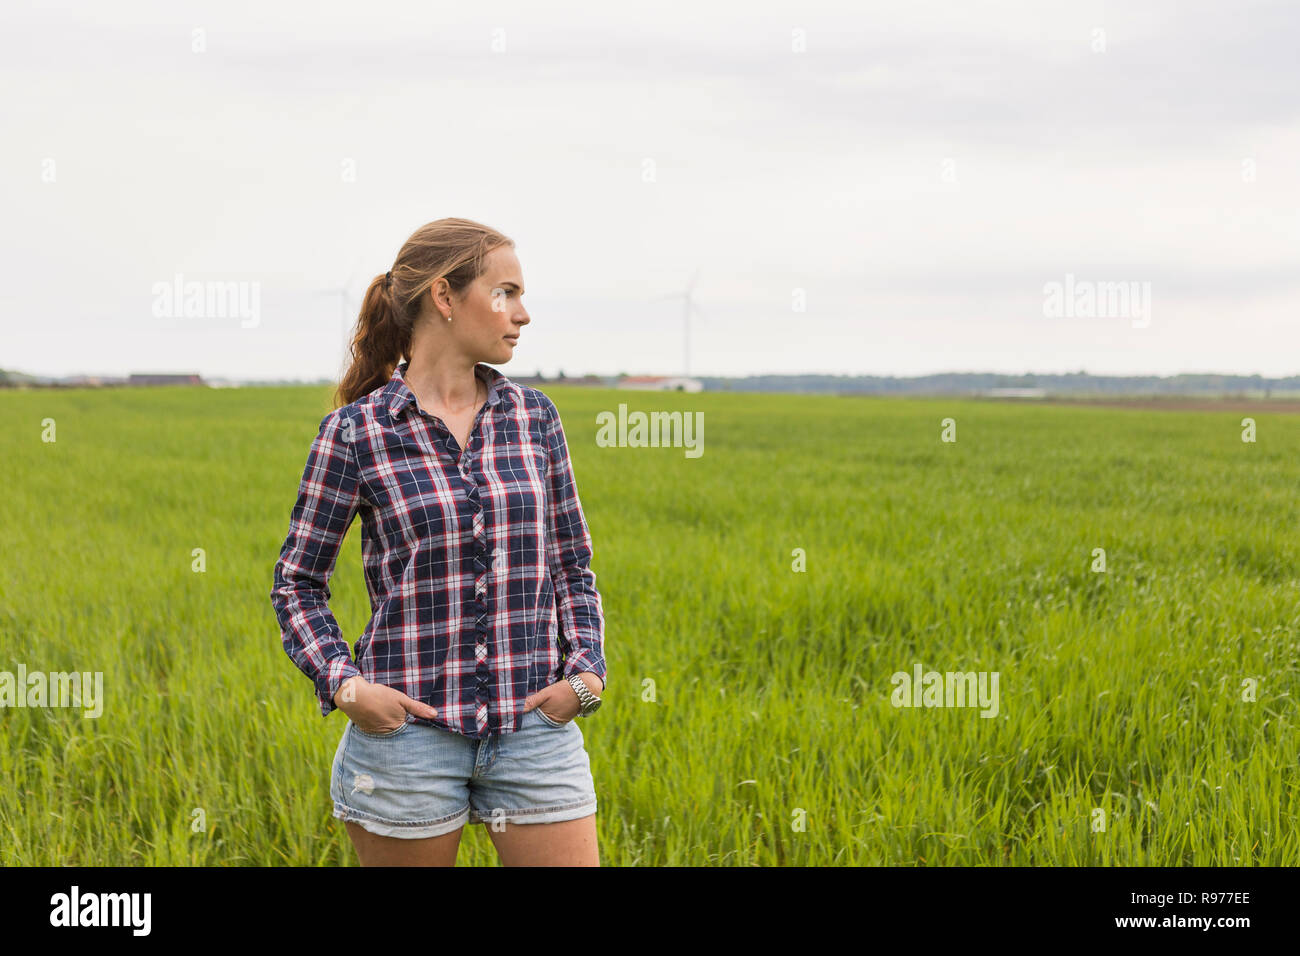 Agricultural worker standing in a field Stock Photo